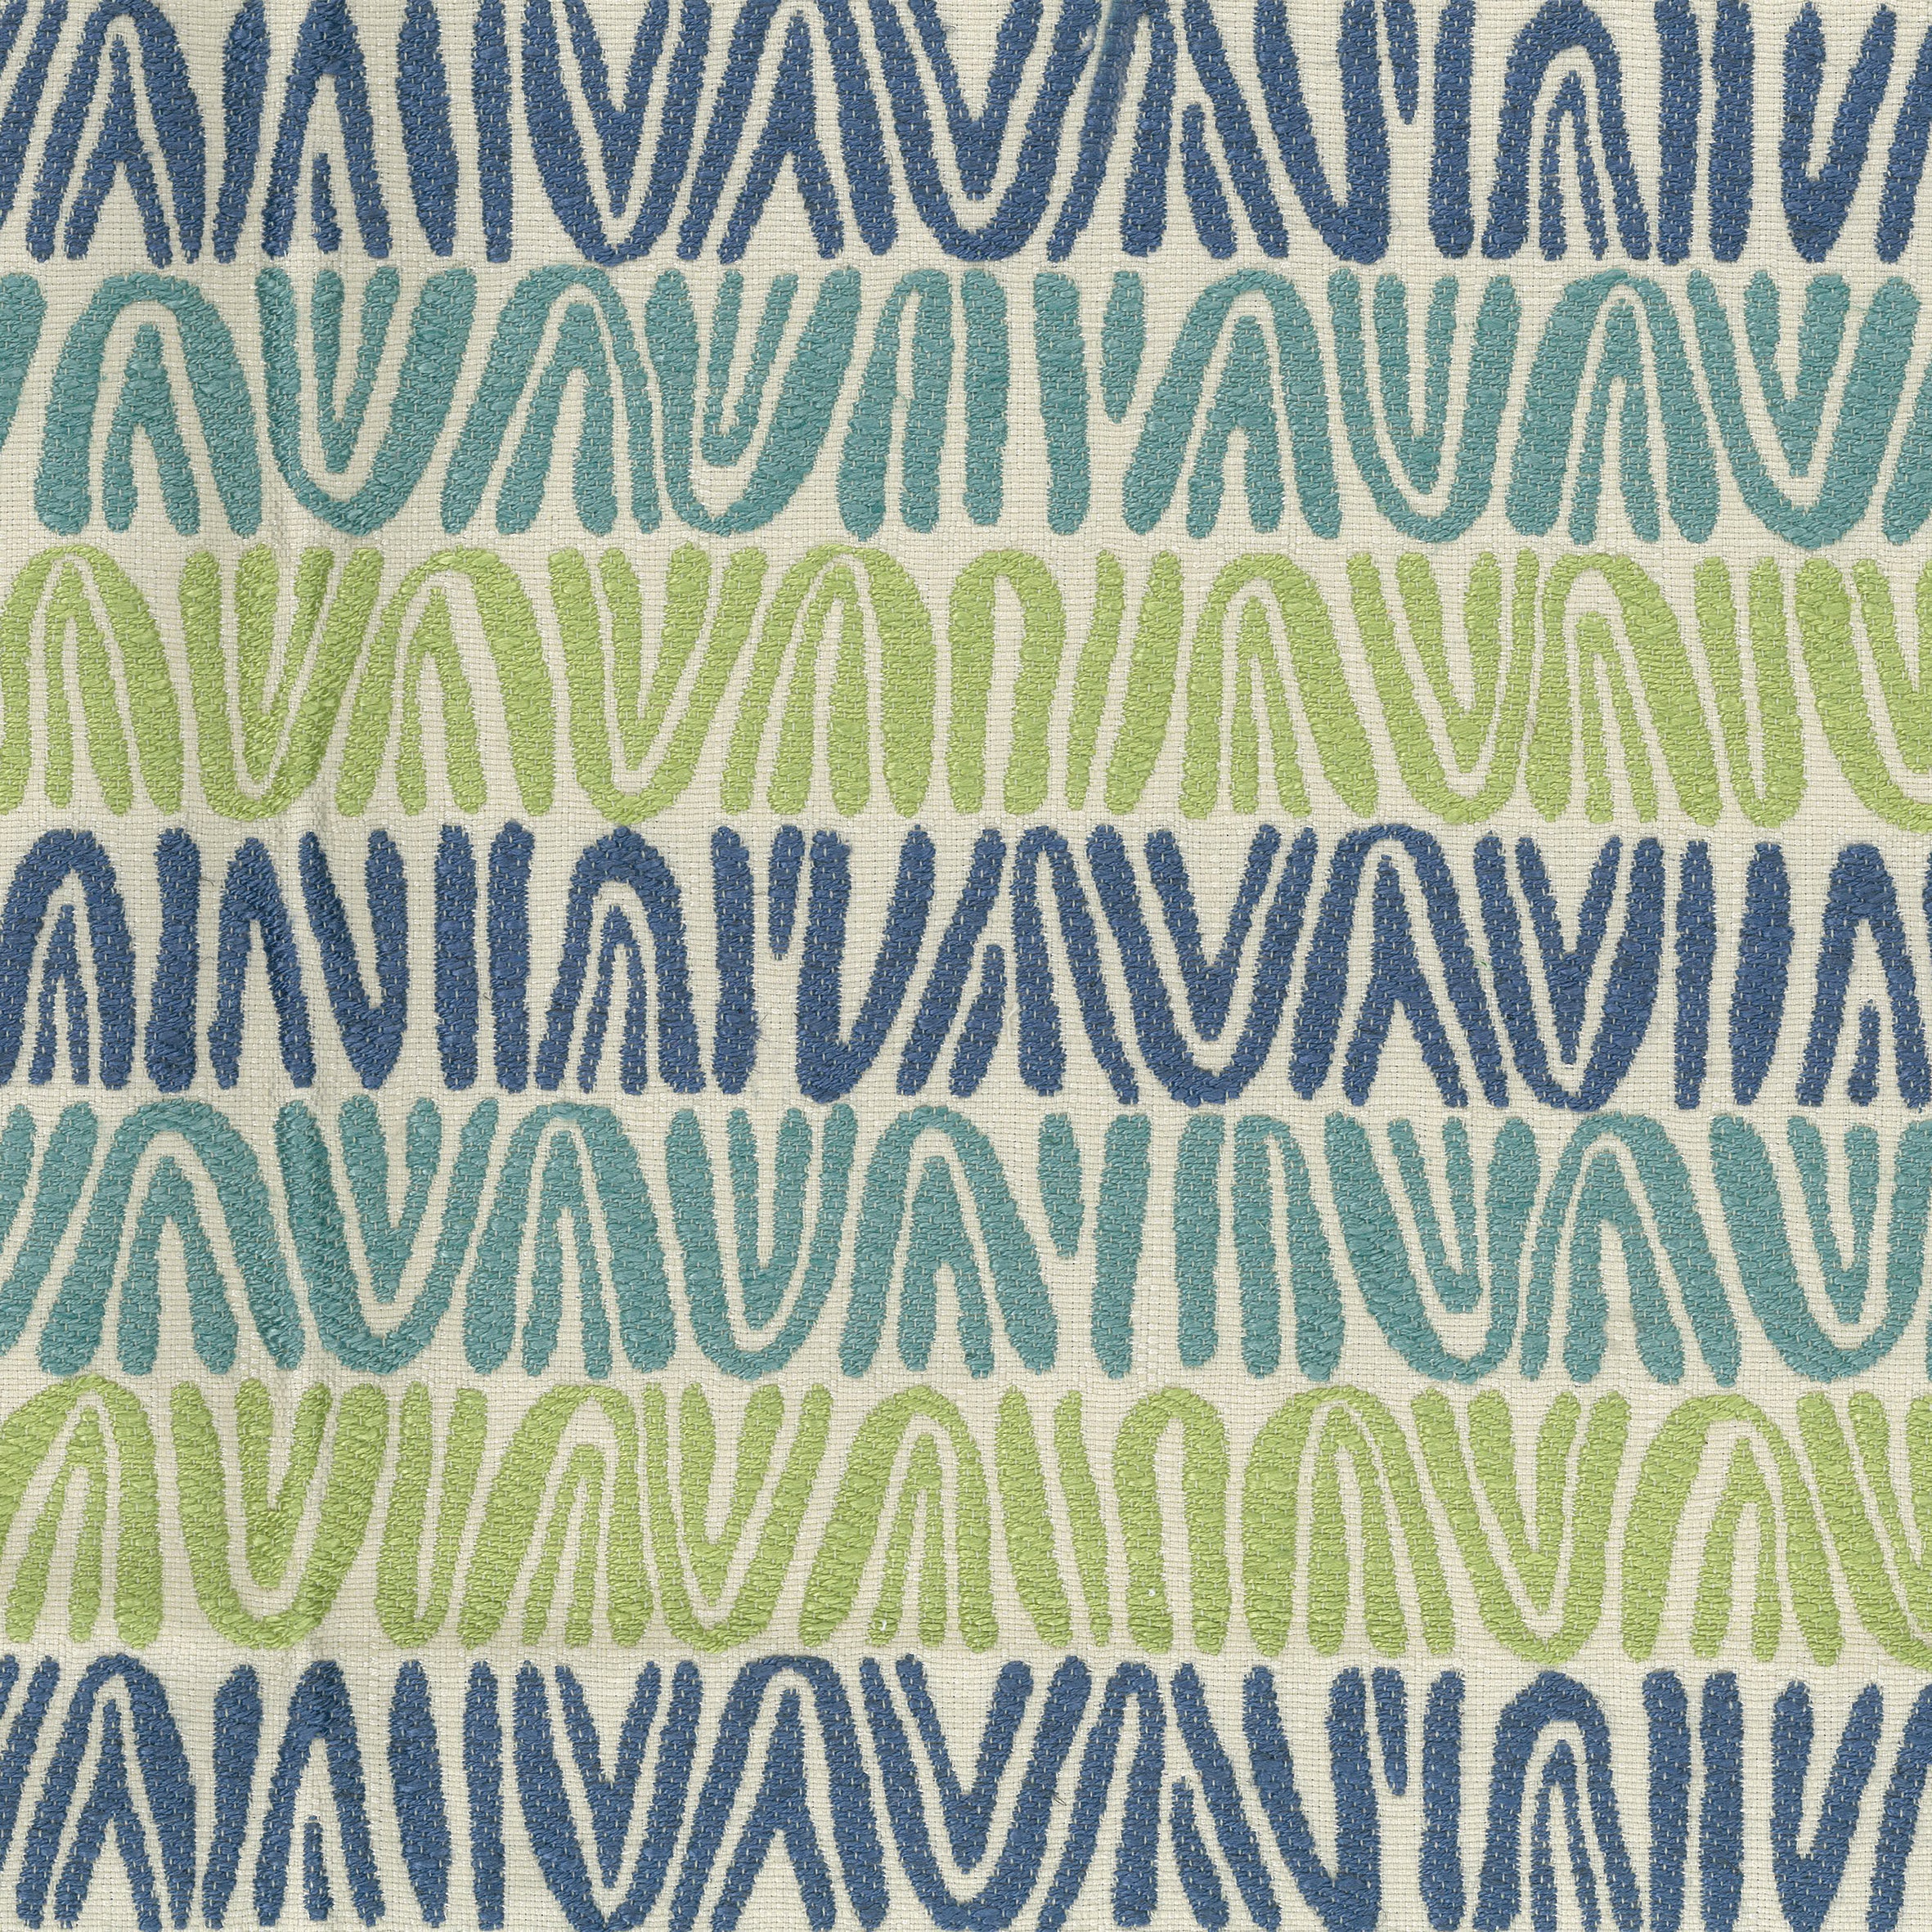 Nina Campbell Fabric - Dallimore Weaves Appledore Blue/Gren/Turquoise NCF4520-01